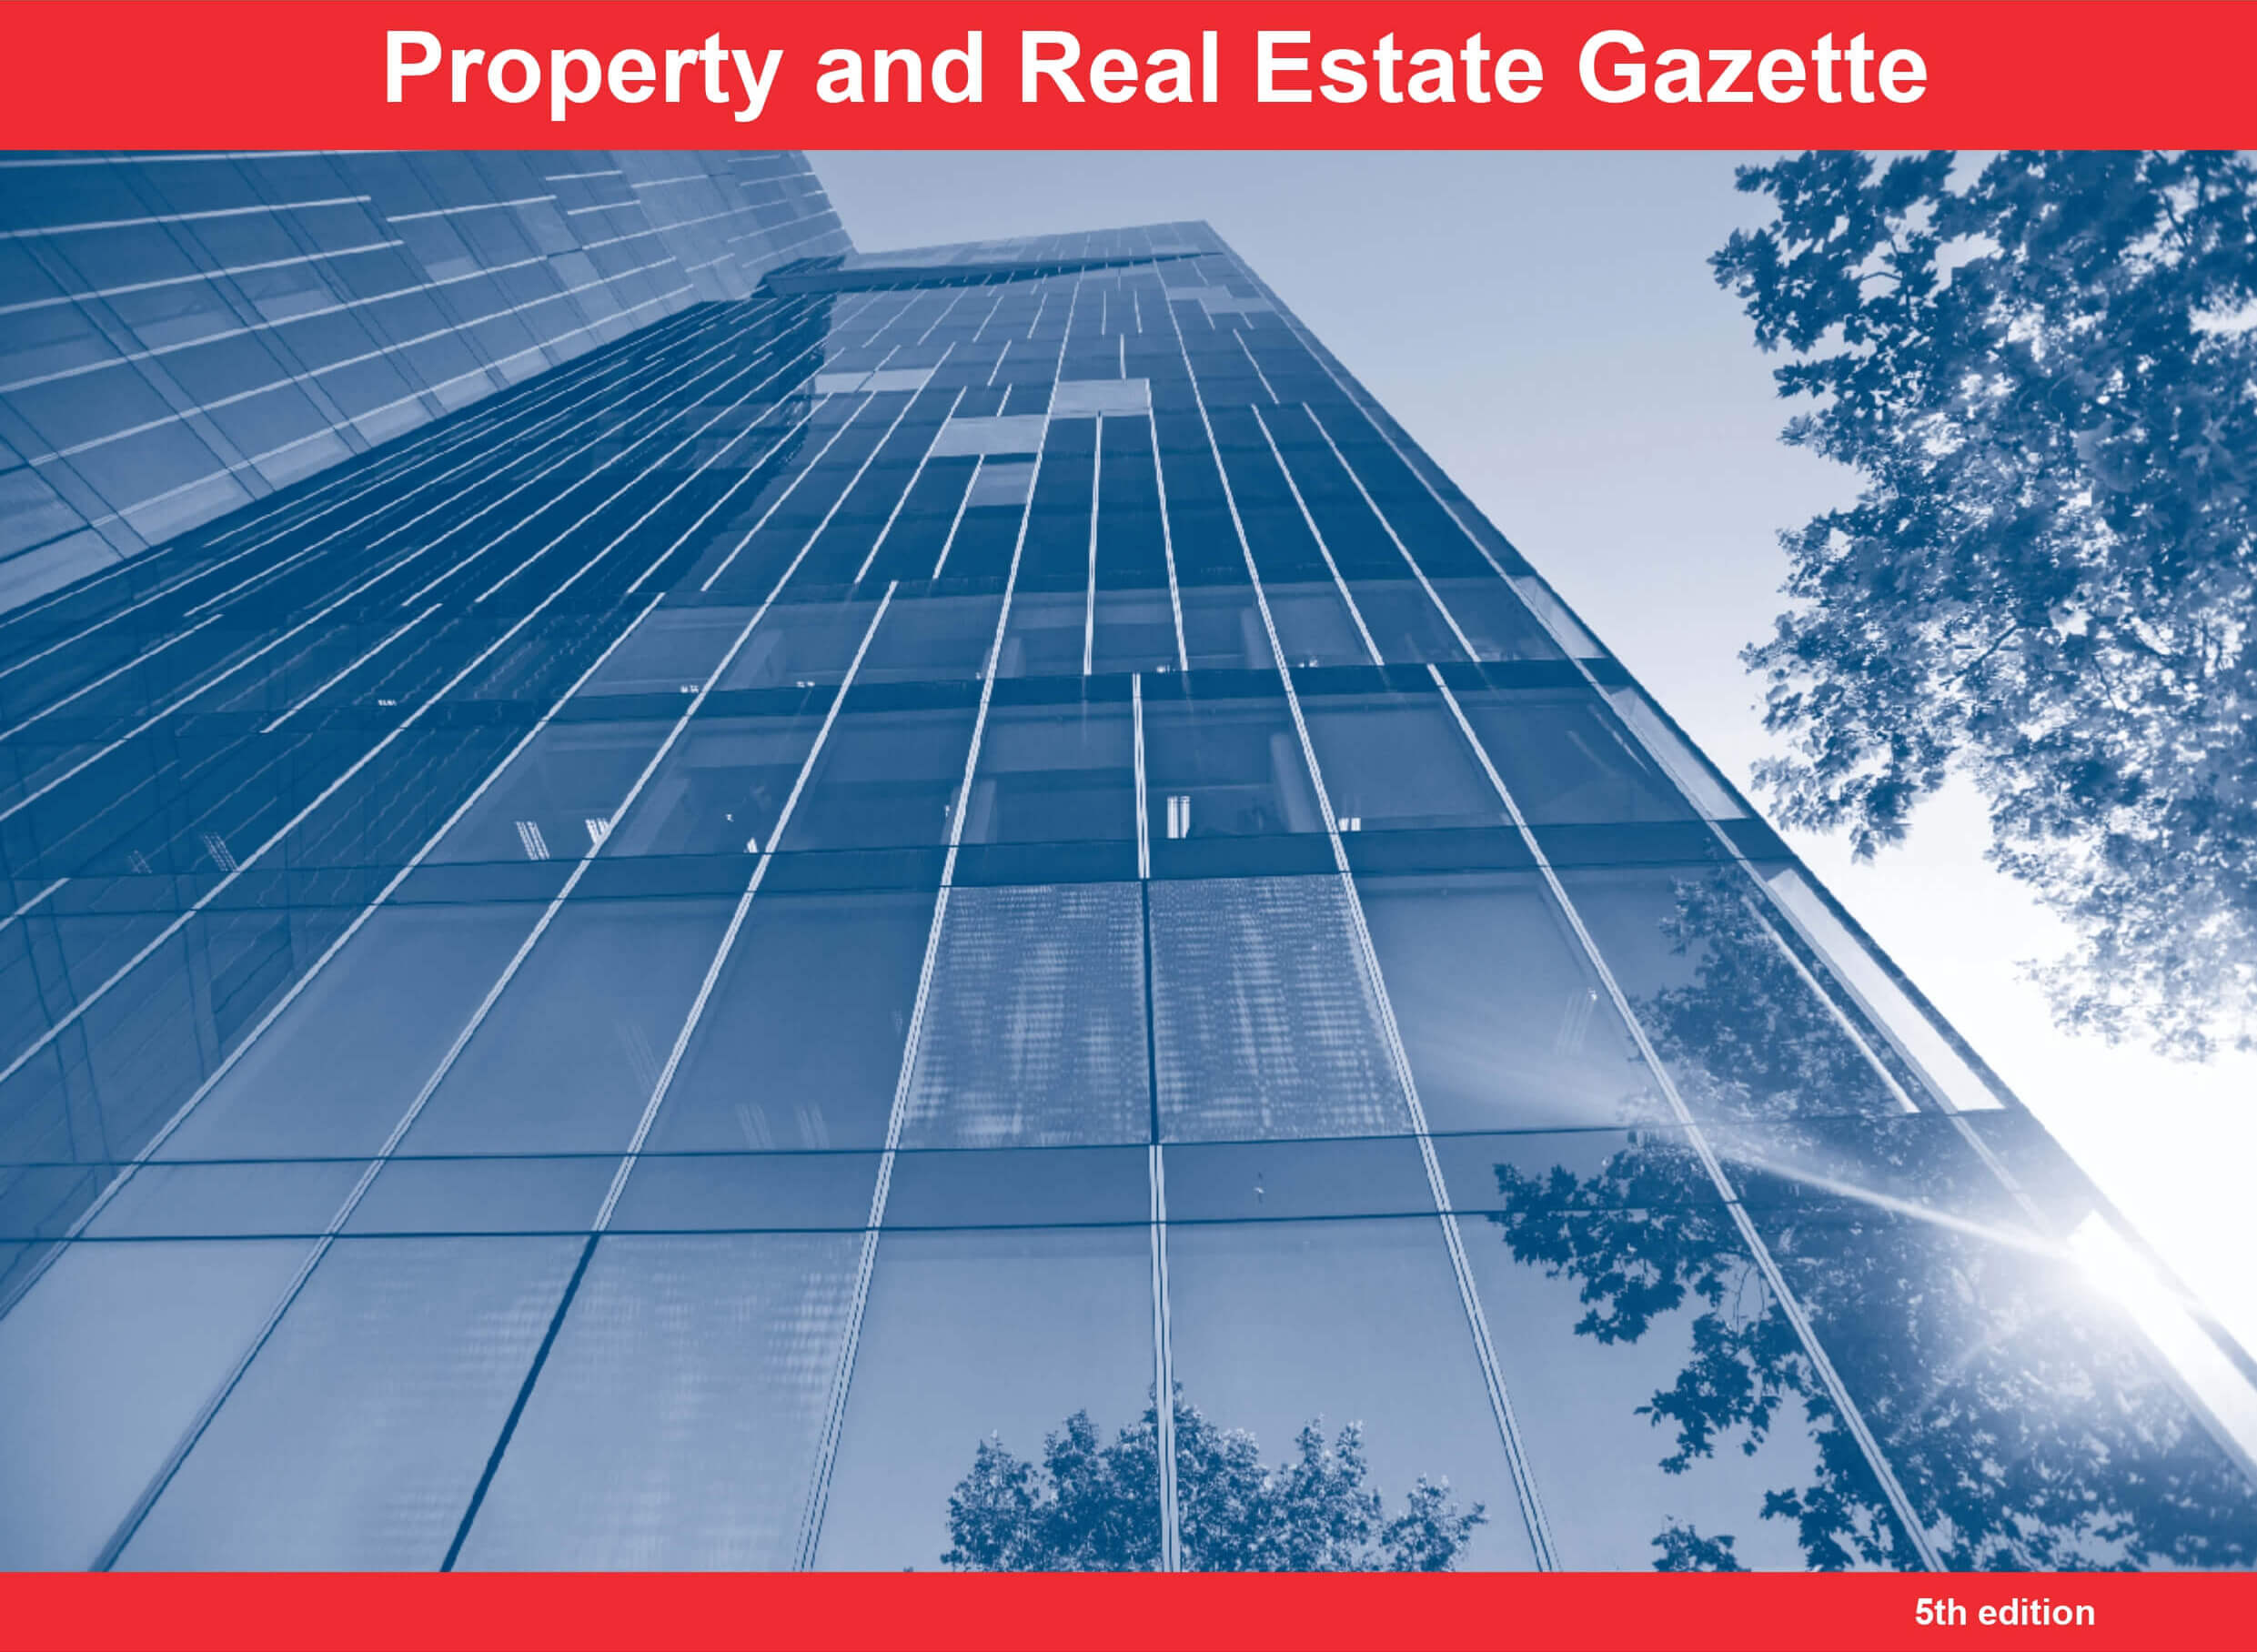 Property and Real Estate Gazette (5th edition)